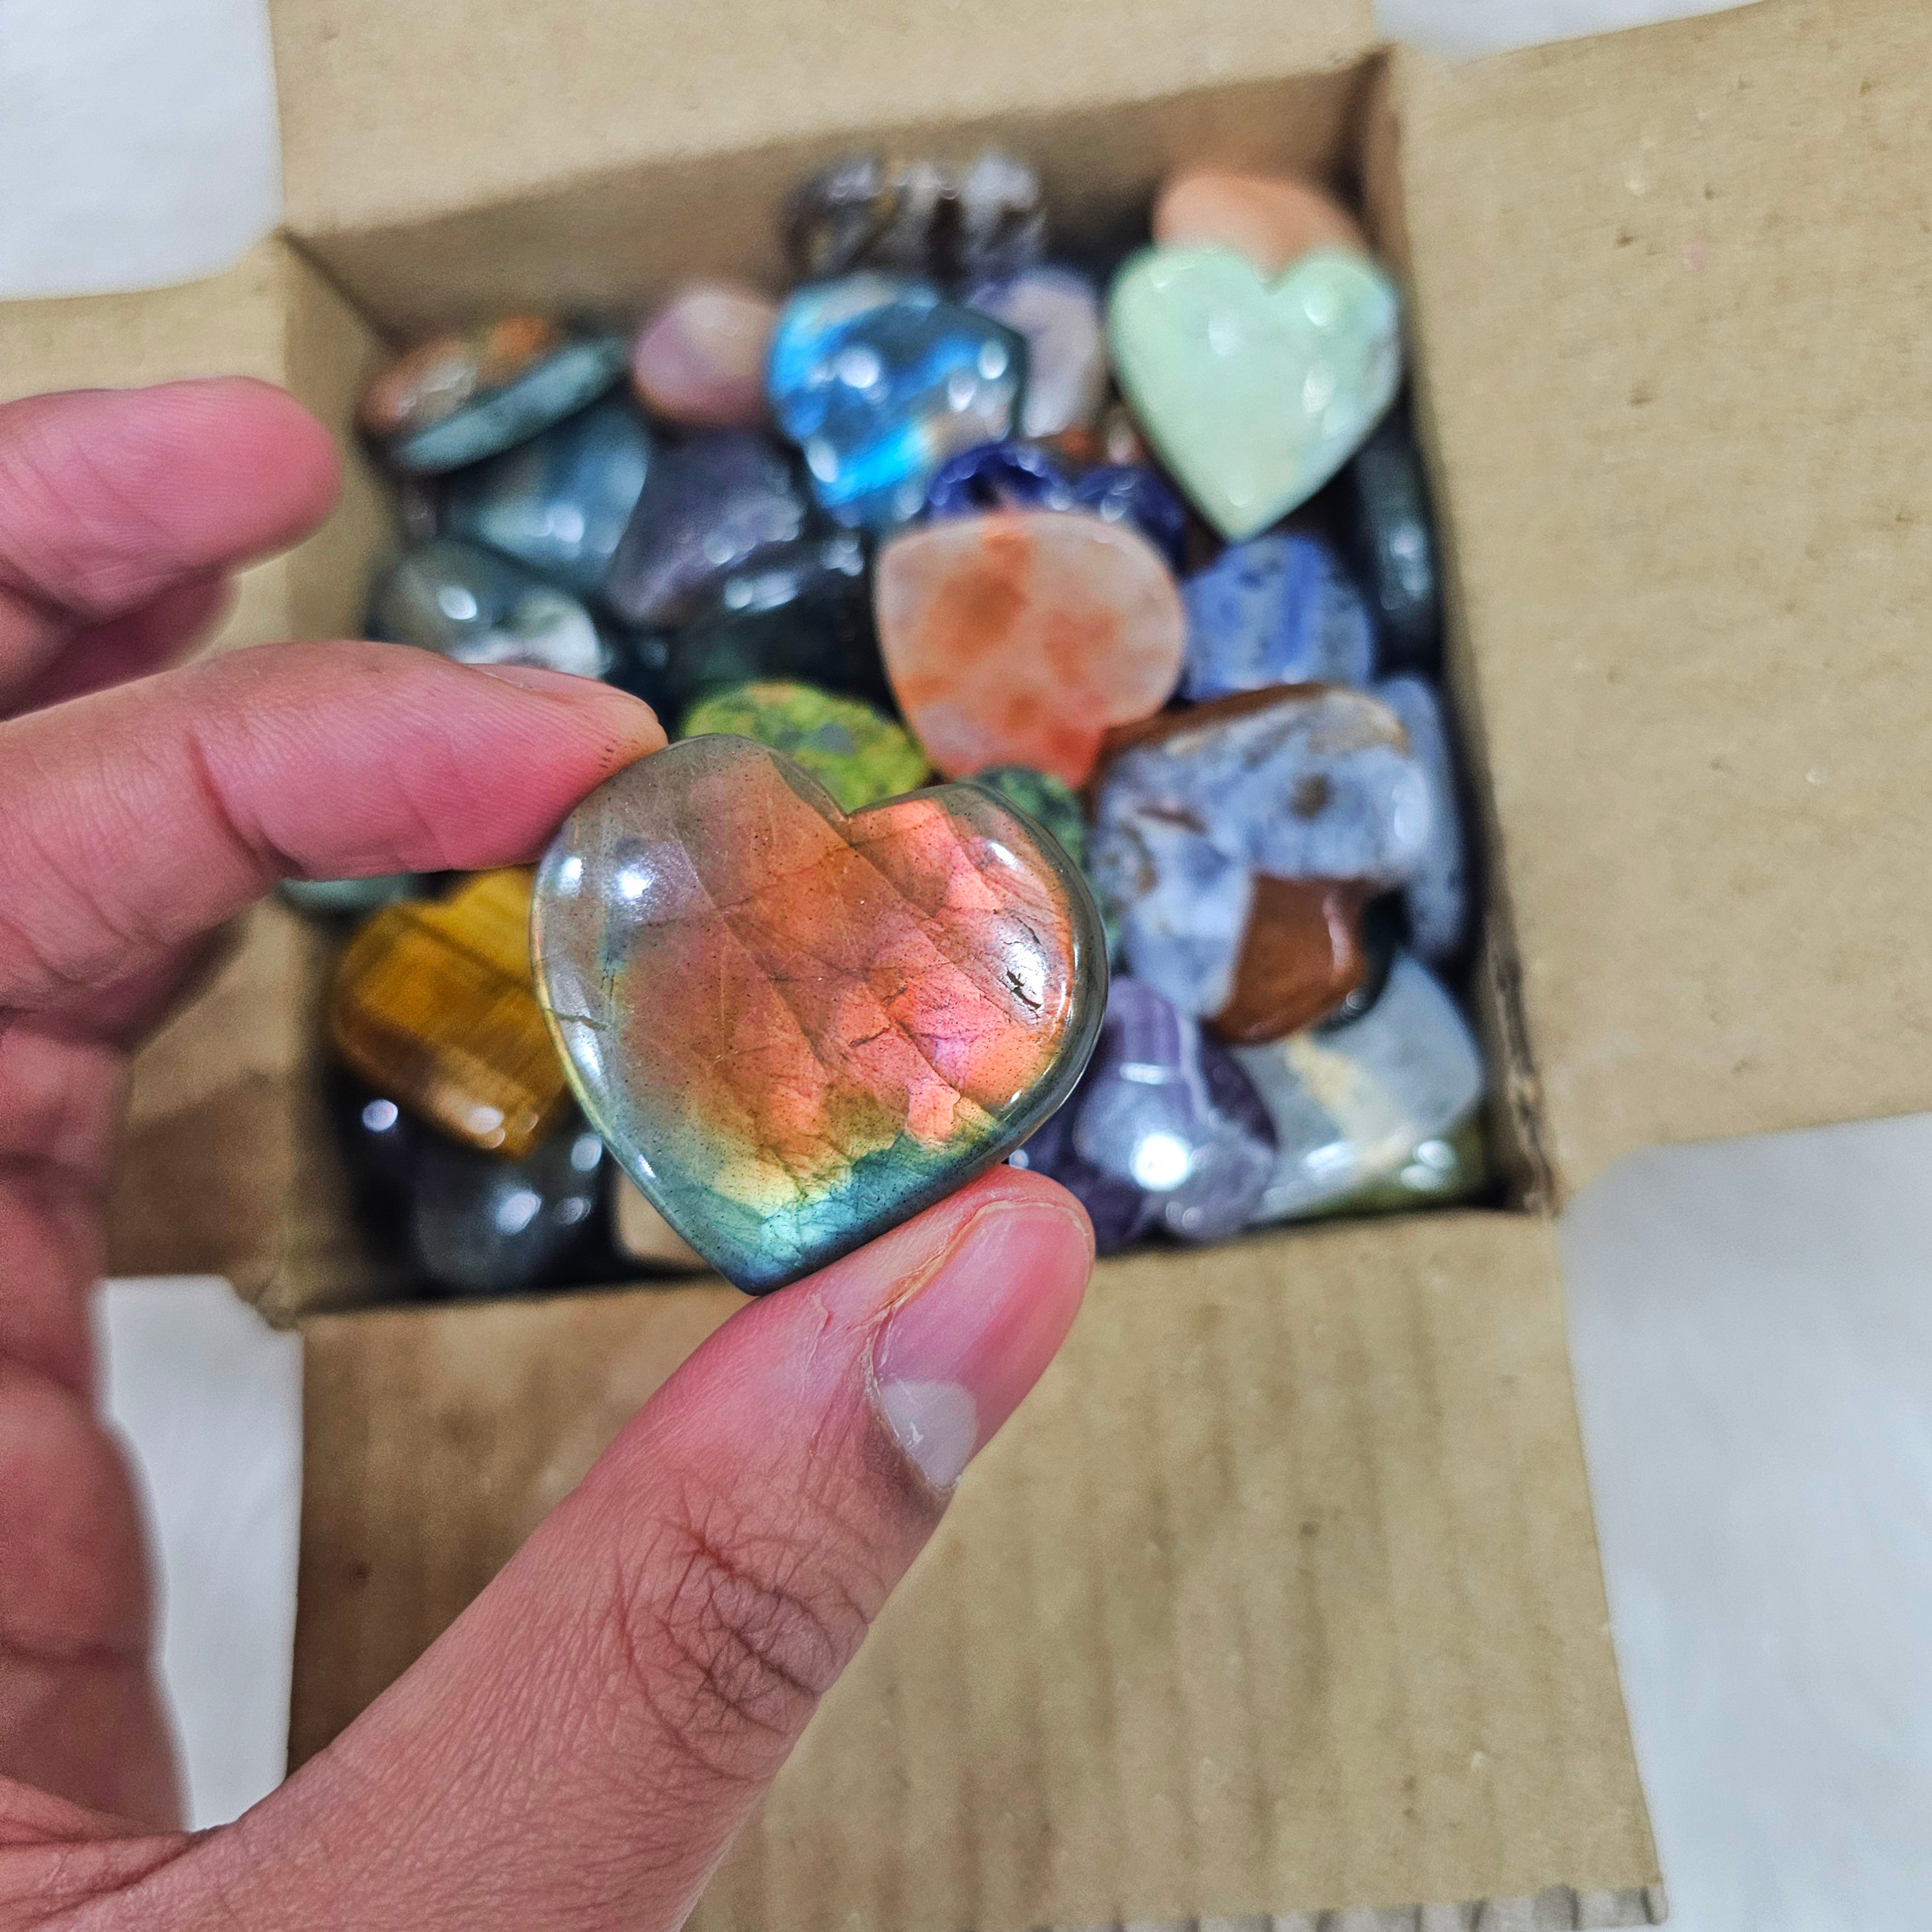 60 Pcs assortment of Crystal Hearts | 1"Inches - 2" Inches | Valentine's Day offer - The LabradoriteKing